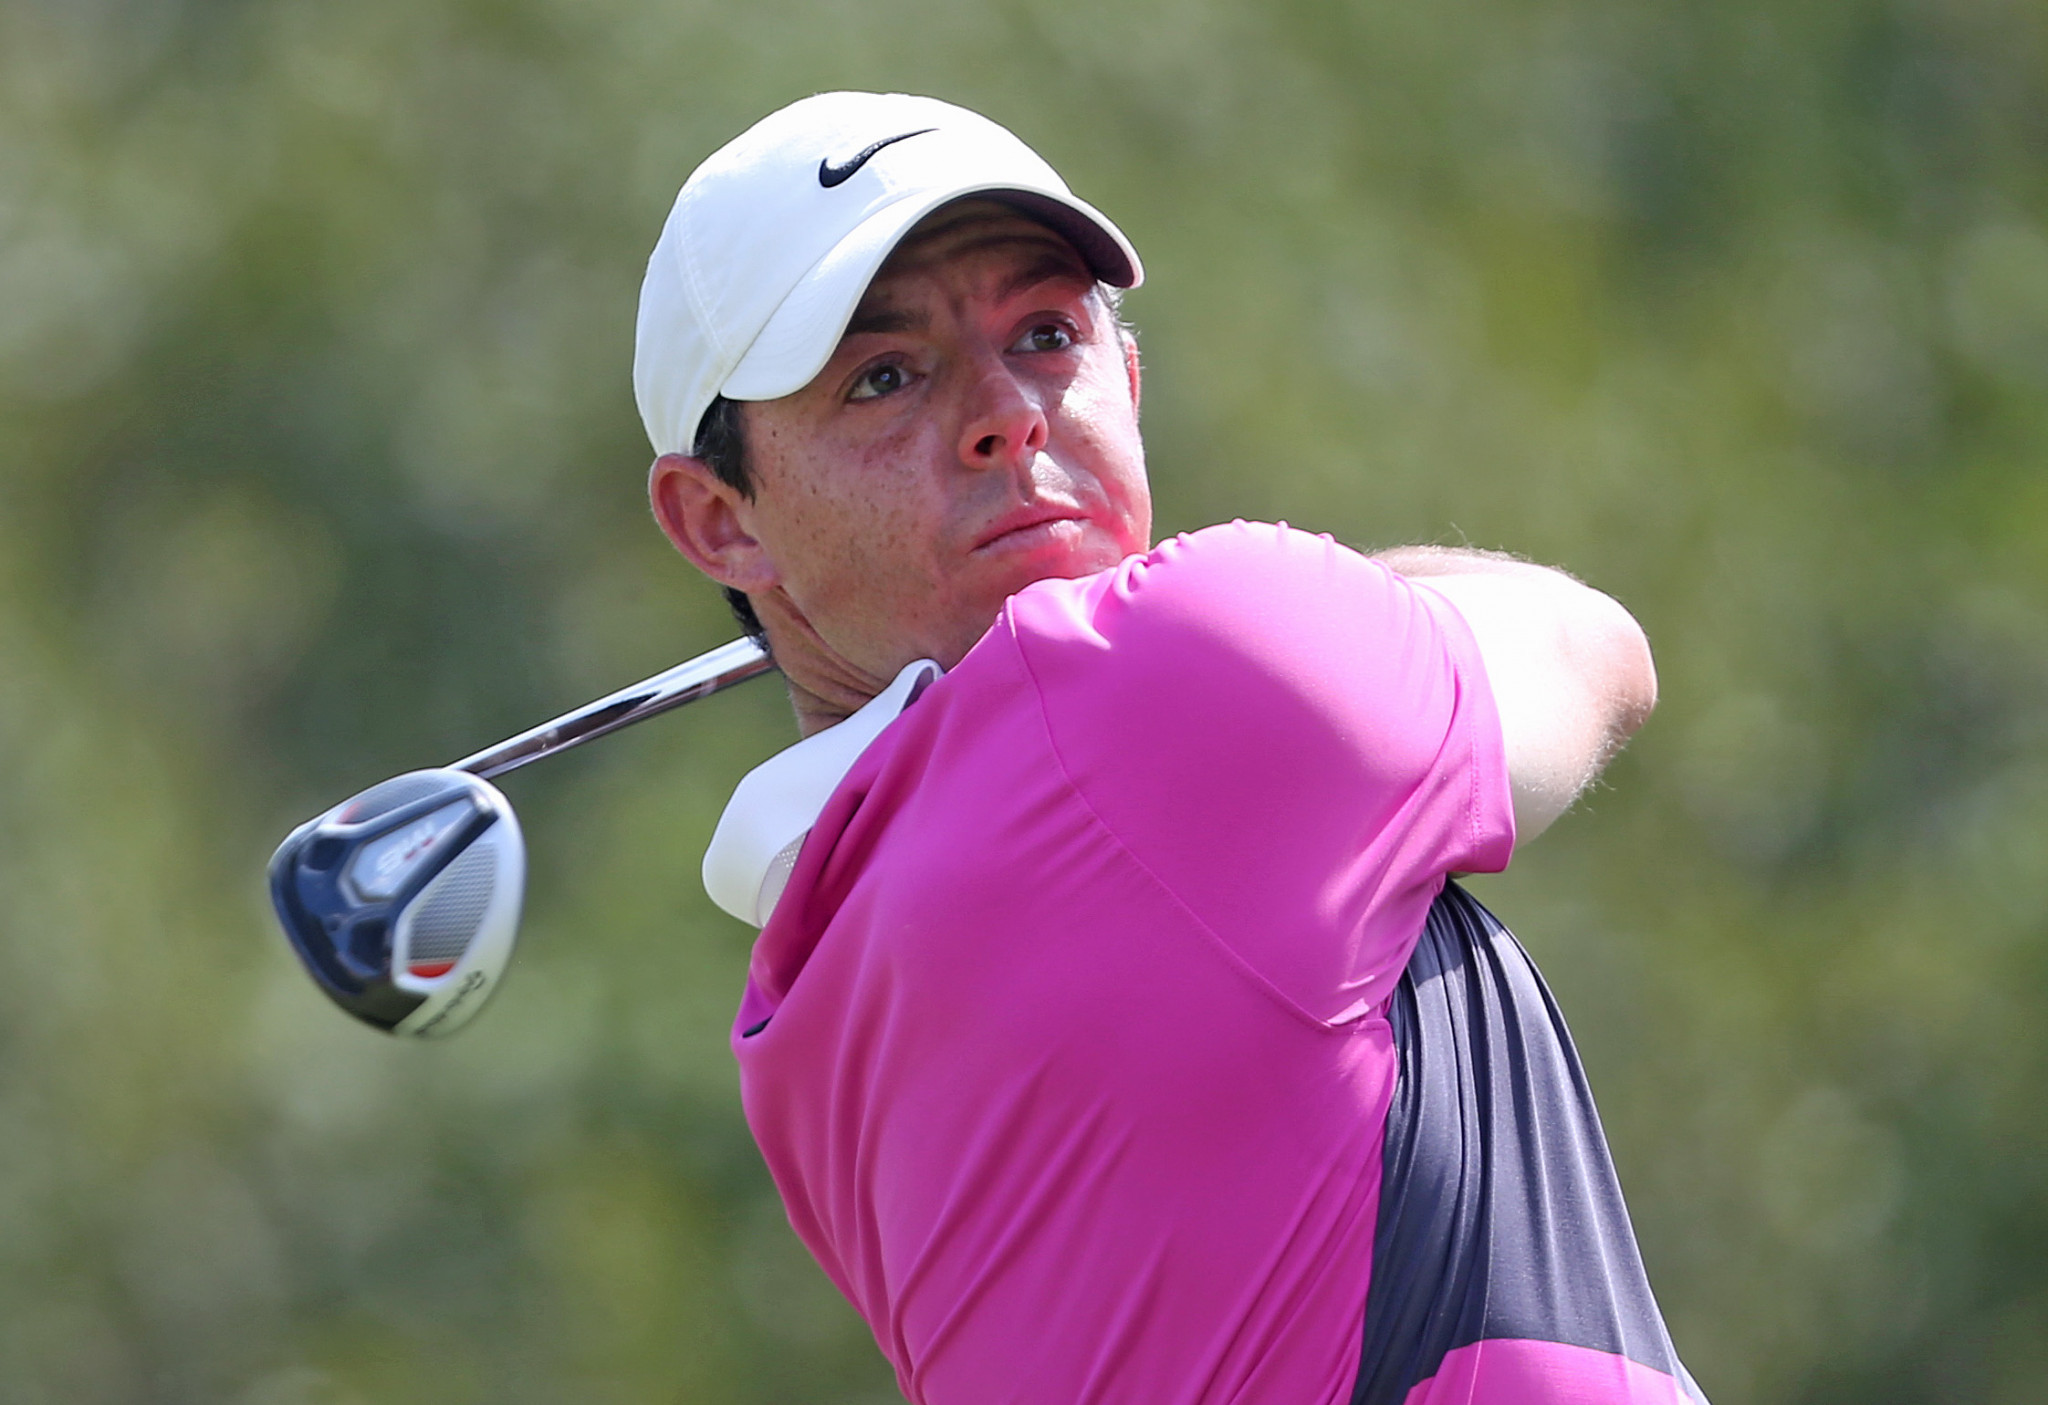 Rory McIlroy has bounced back from last week's Open Championship disappointment to lead the World Golf Championships-FedEx St. Jude Invitational ©Getty Images